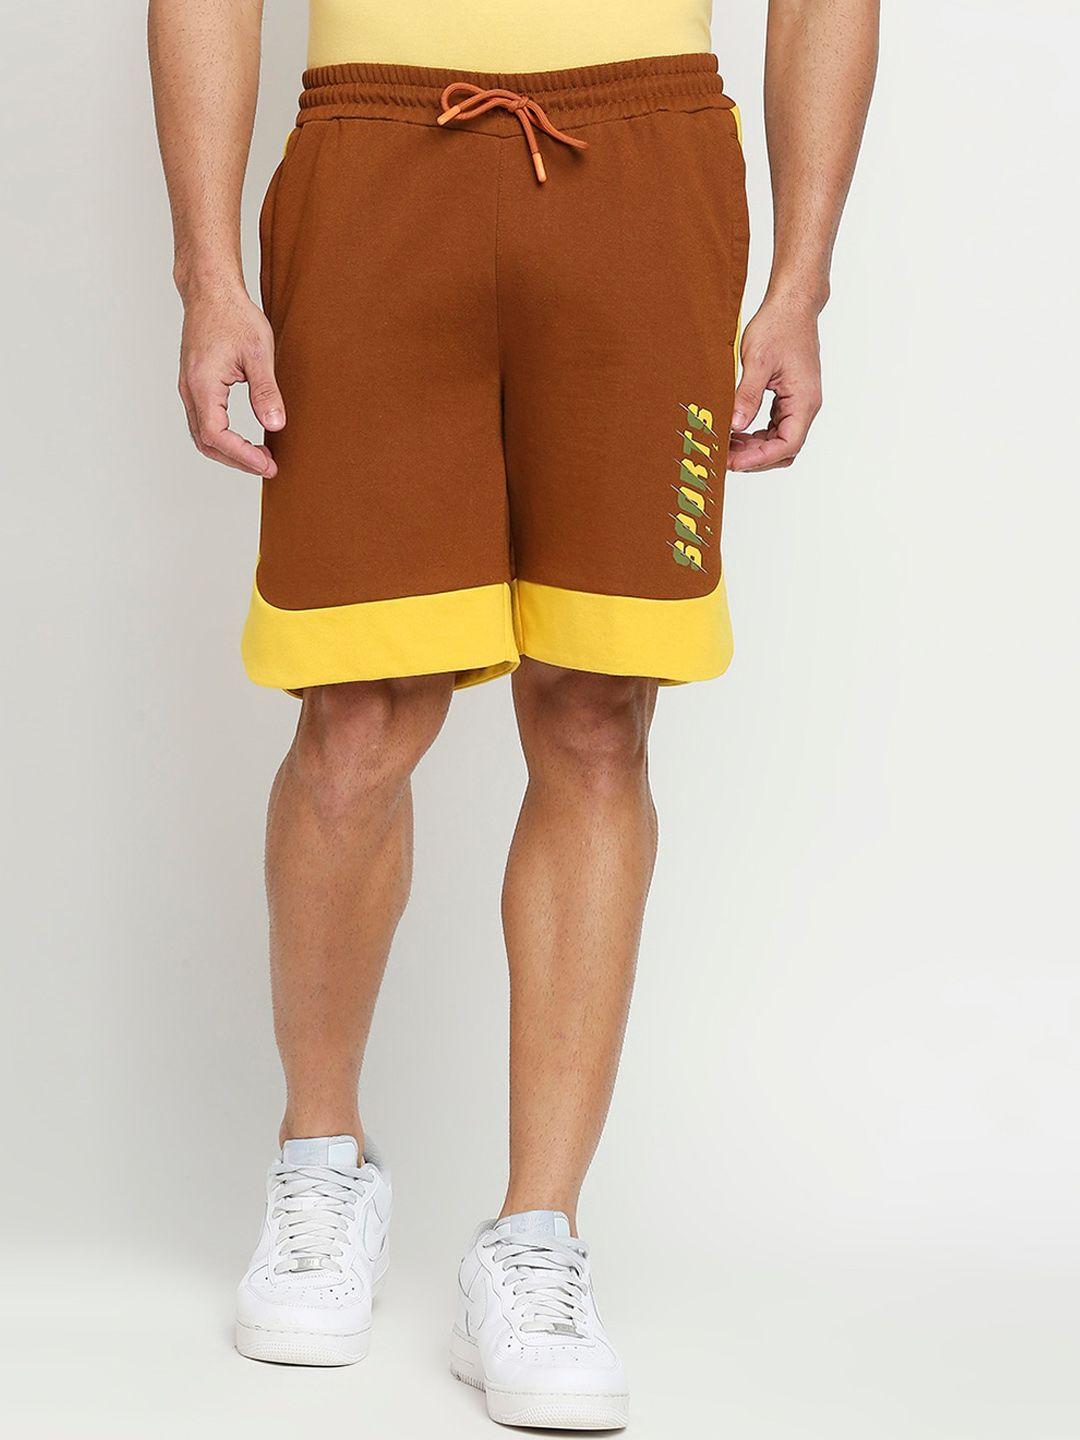 fitz men brown slim fit running sports shorts with e-dry technology technology